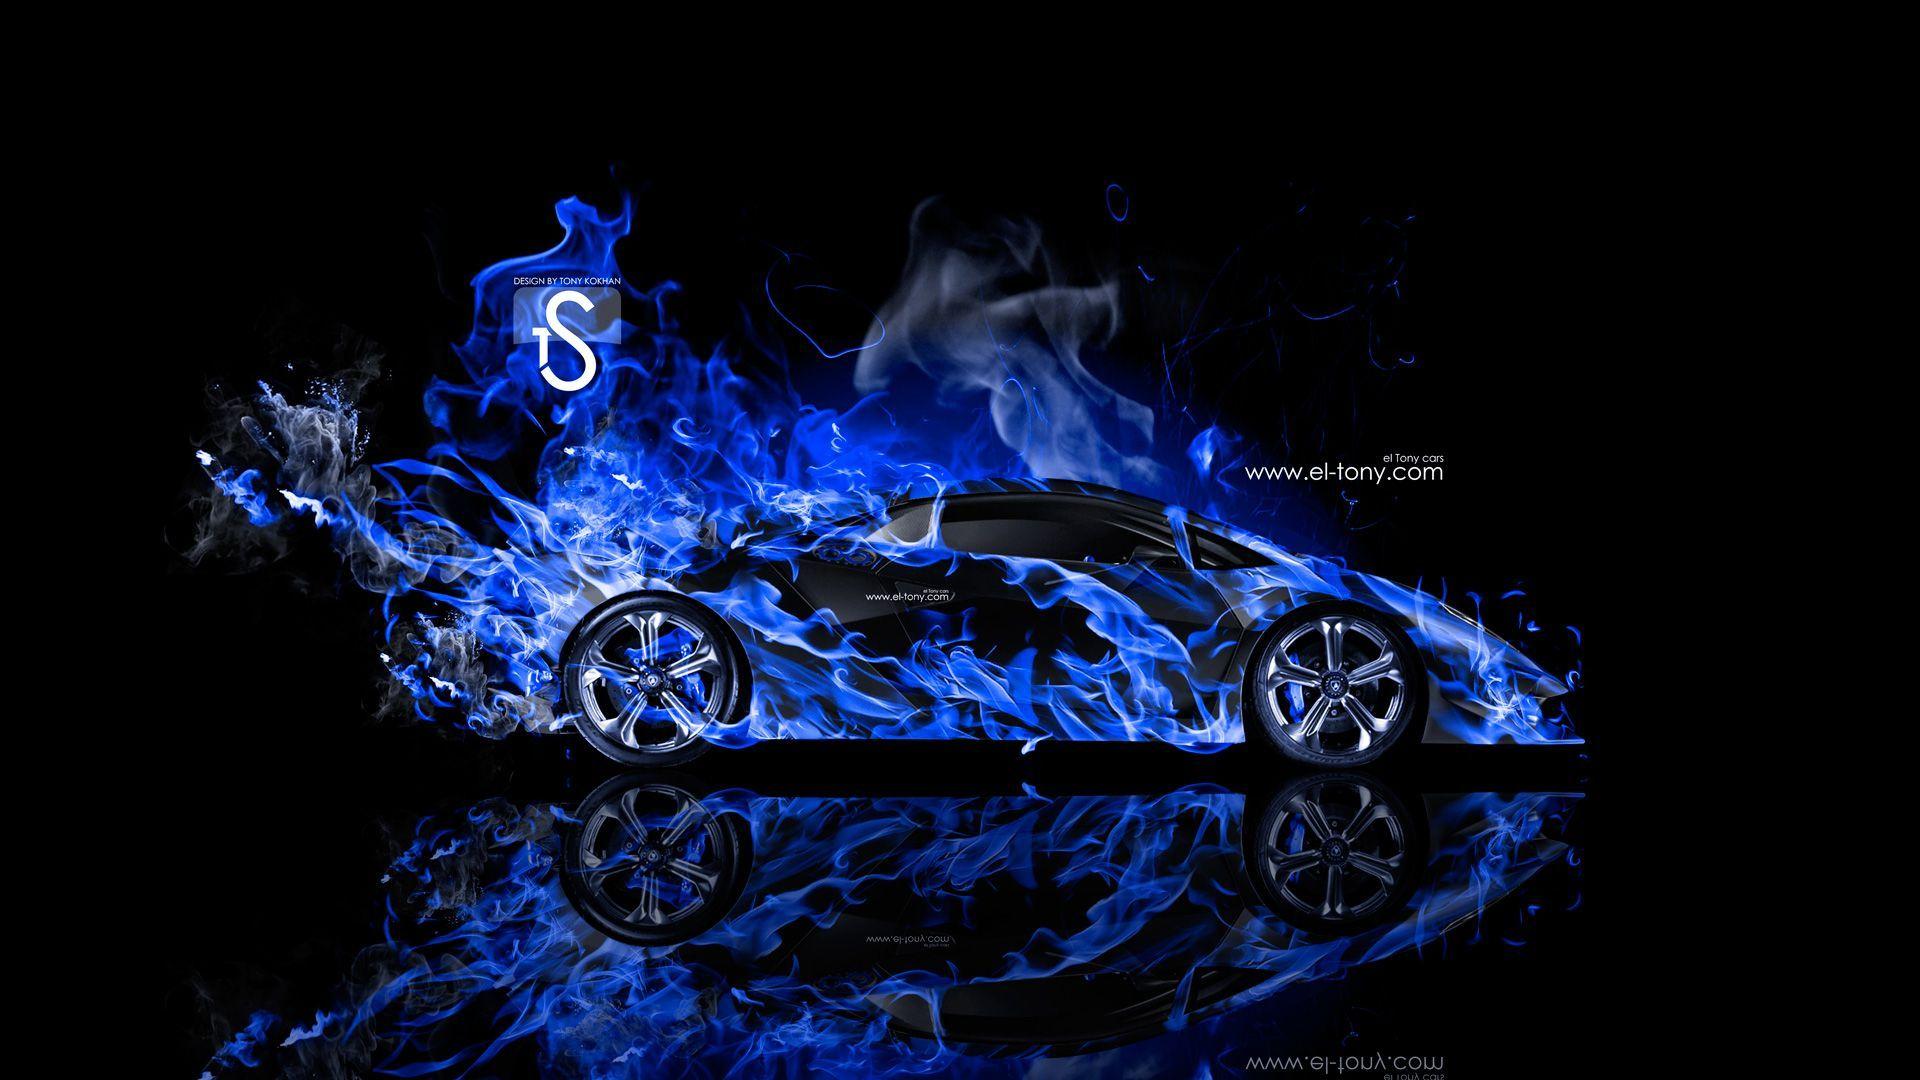 Ideas For Blue Wallpaper Cool Galaxy Lamborghini Wallpaper If you have your own one, just send us the image and we will show. ideas for blue wallpaper cool galaxy